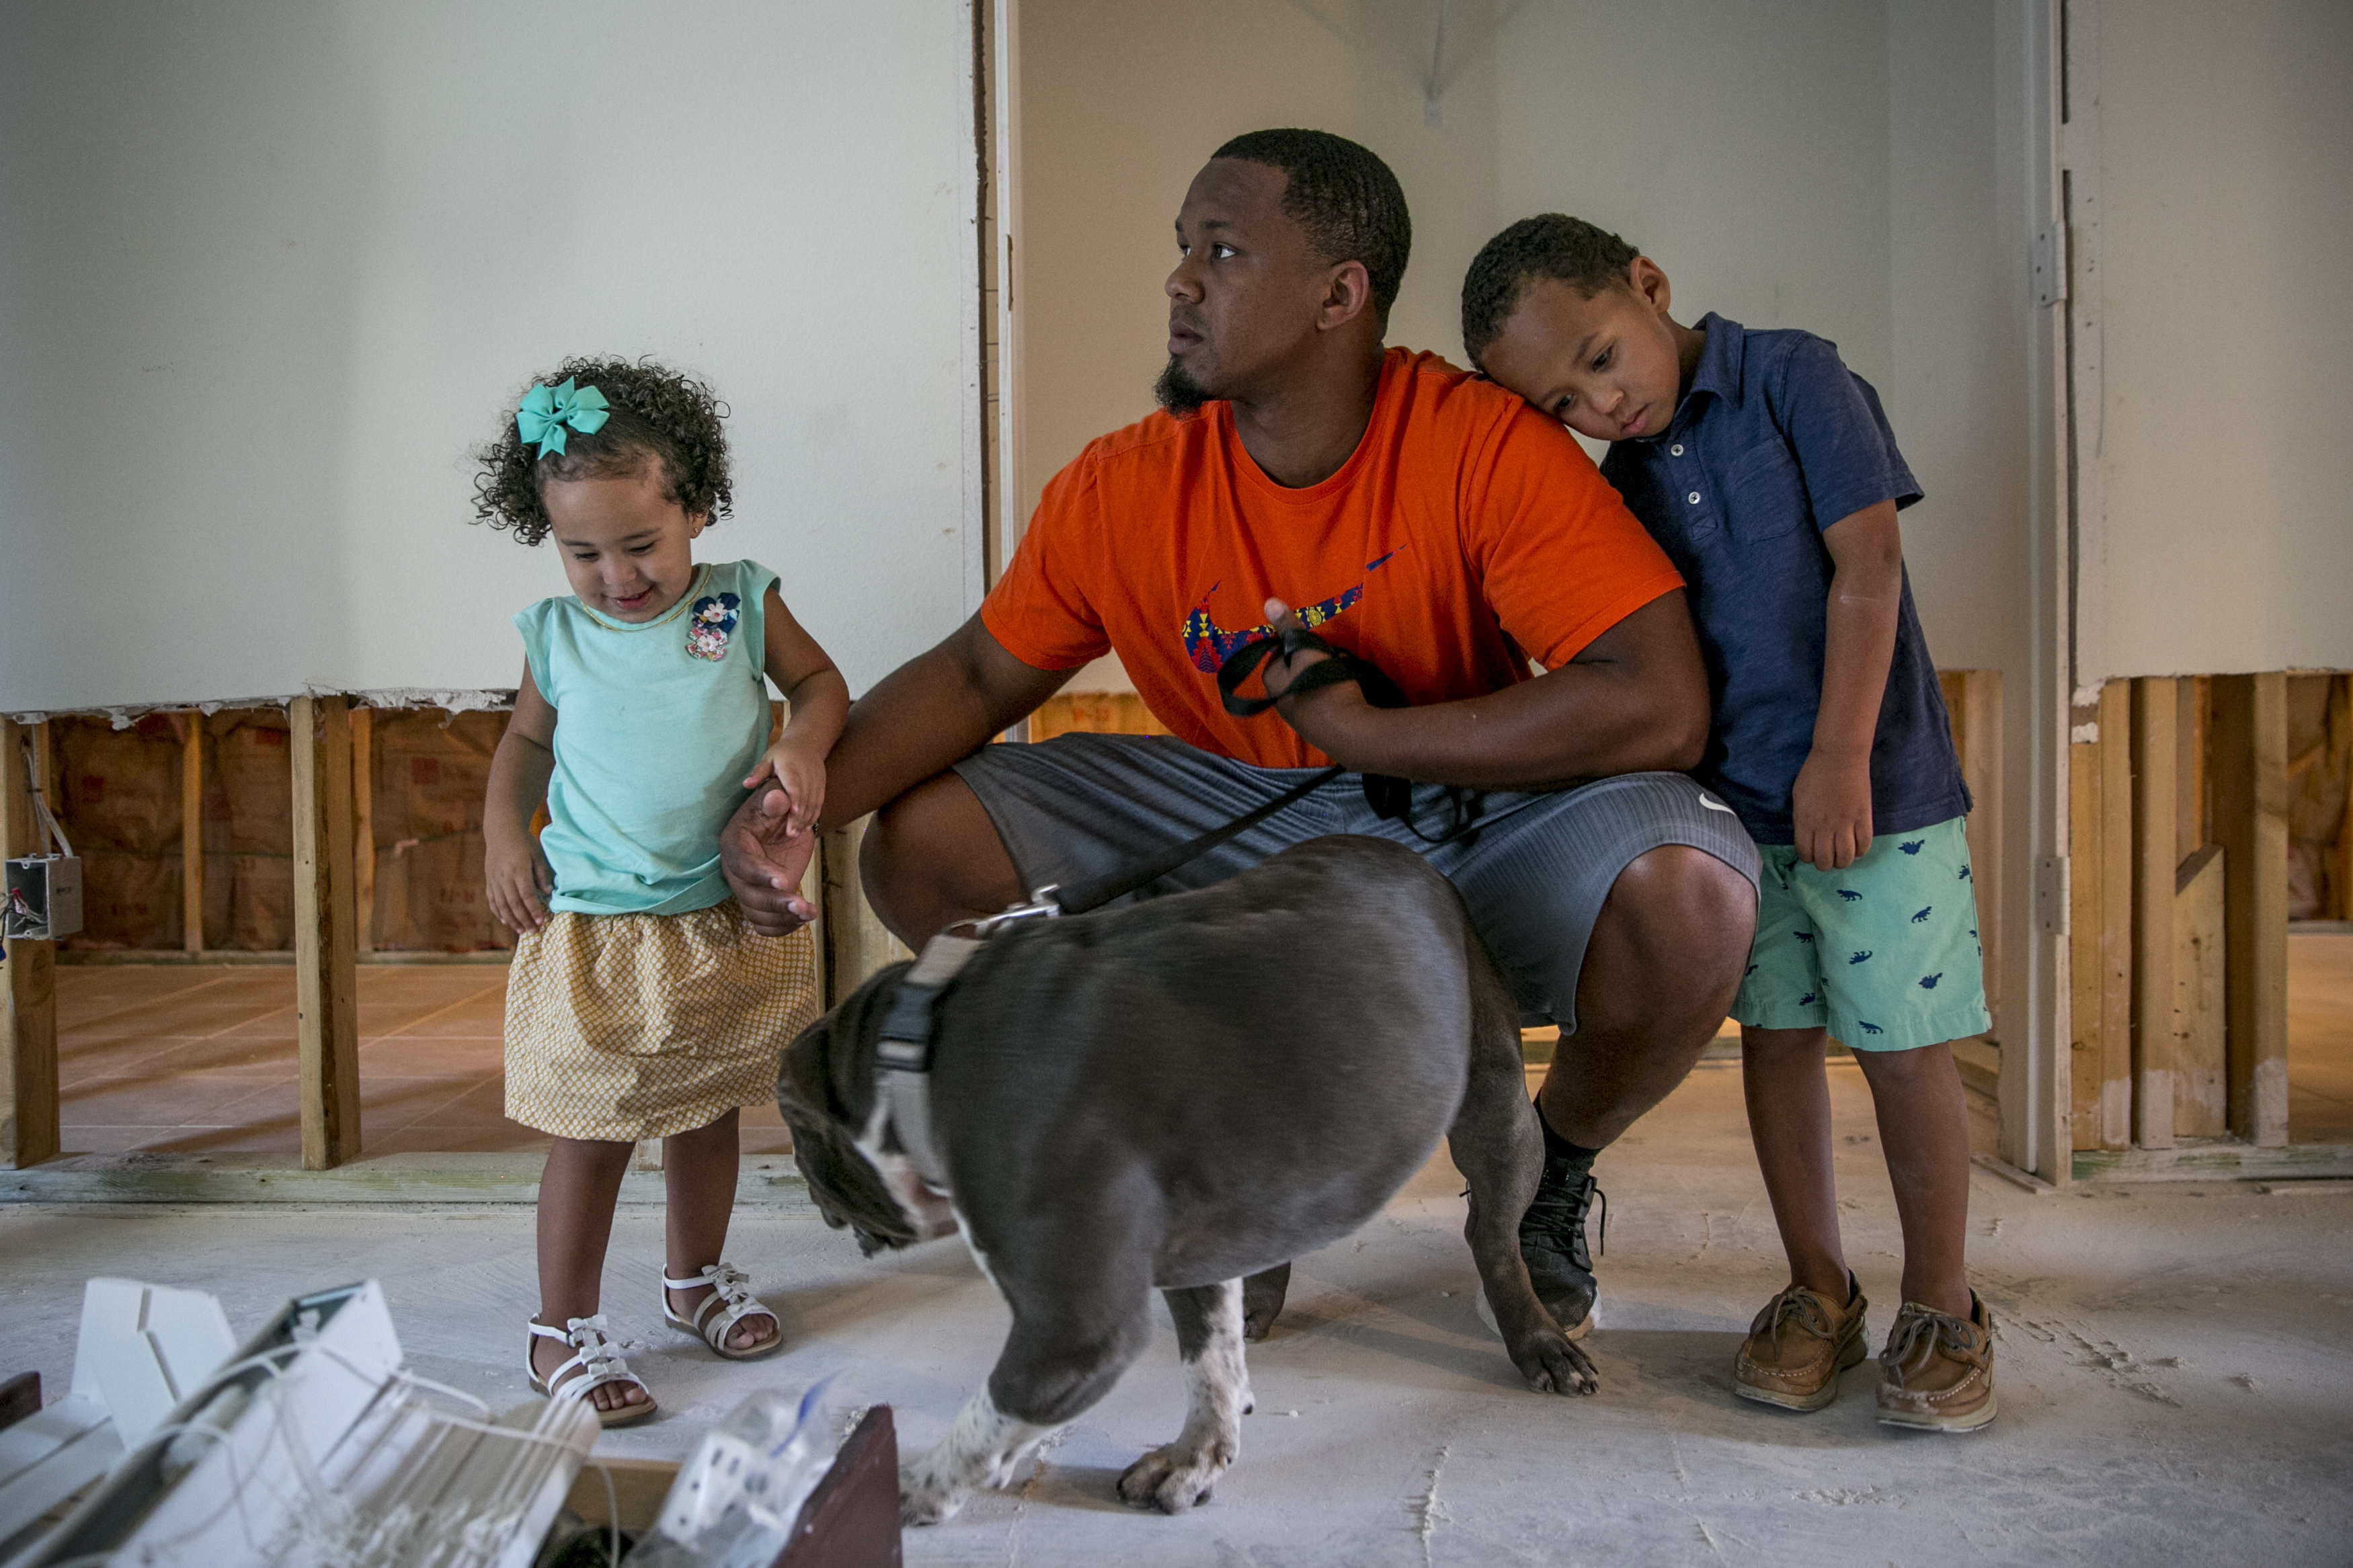 Isiah and his children Bryson and Aubree inside their home. (Ilana Panich-Linsman for TIME)